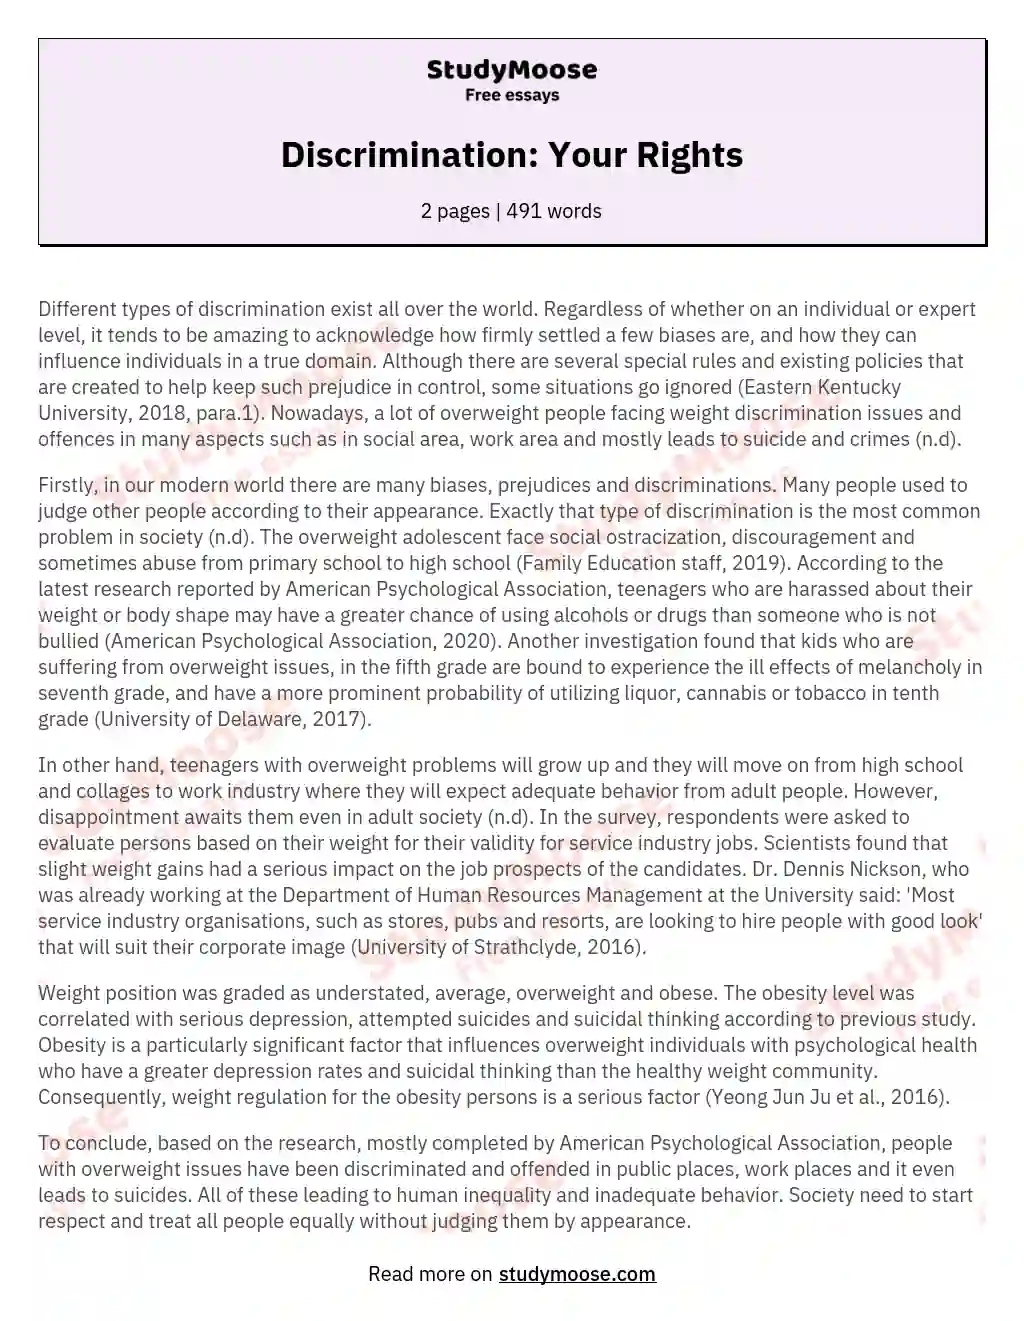 example of essay about discrimination